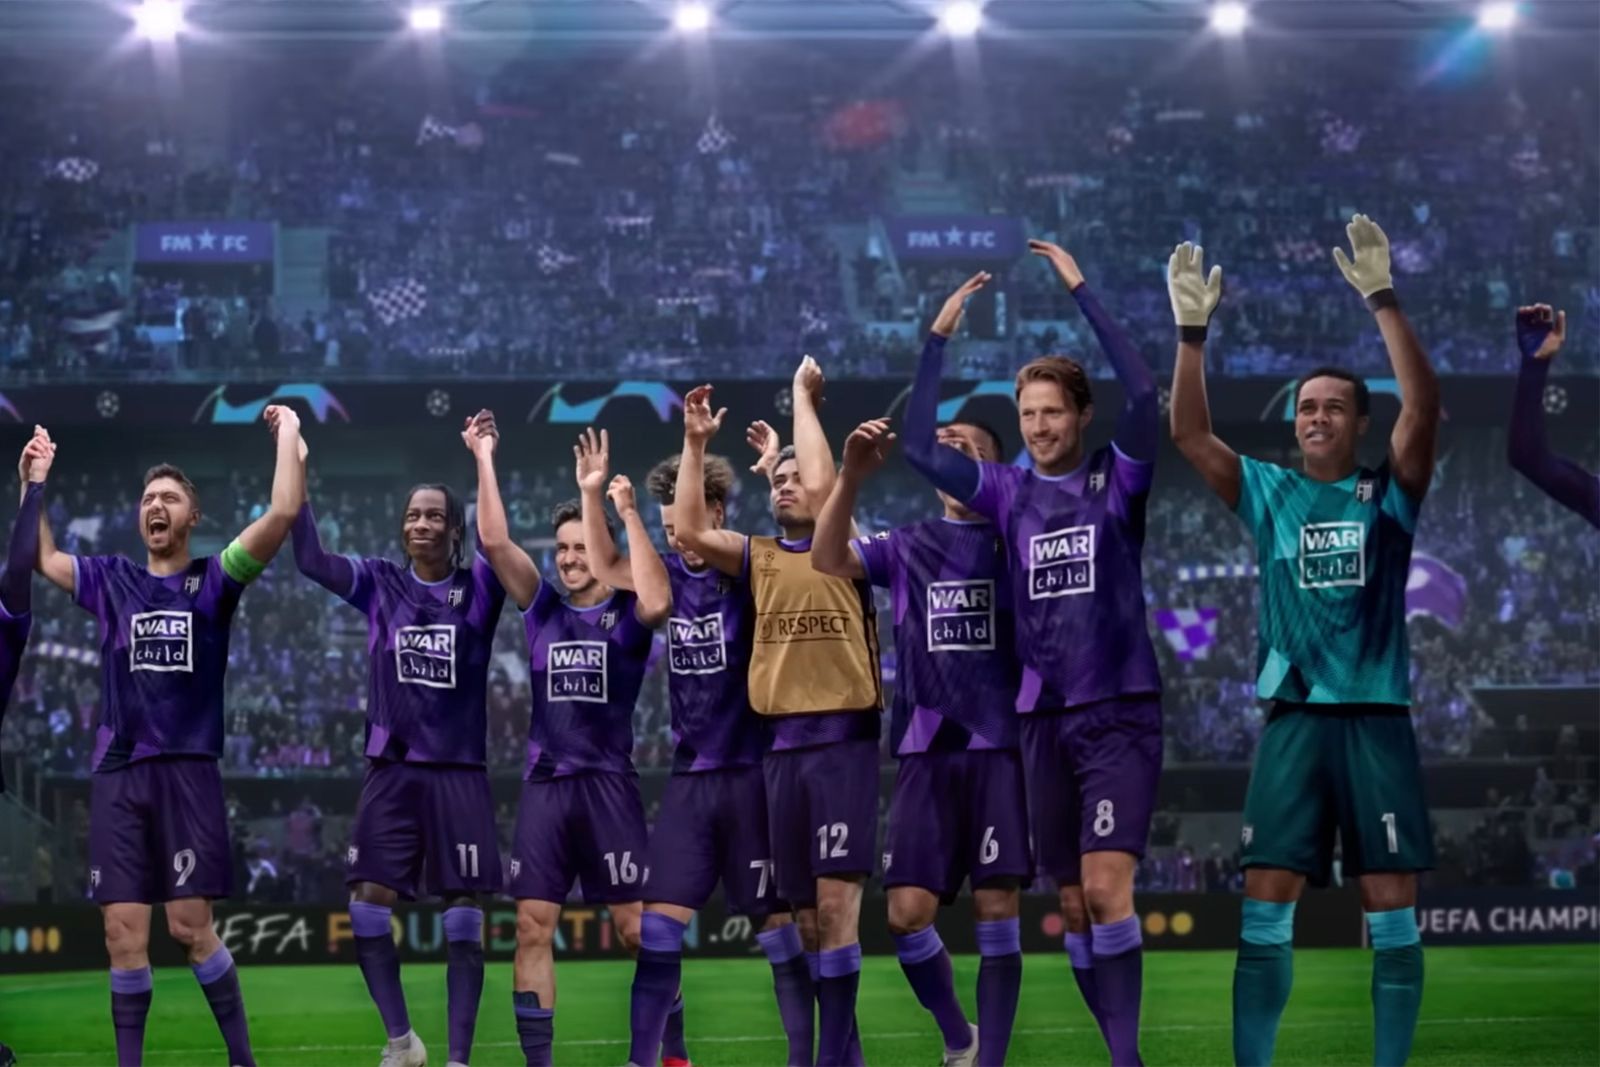 Football Manager 2023 Touch Coming to Apple Arcade - MacRumors